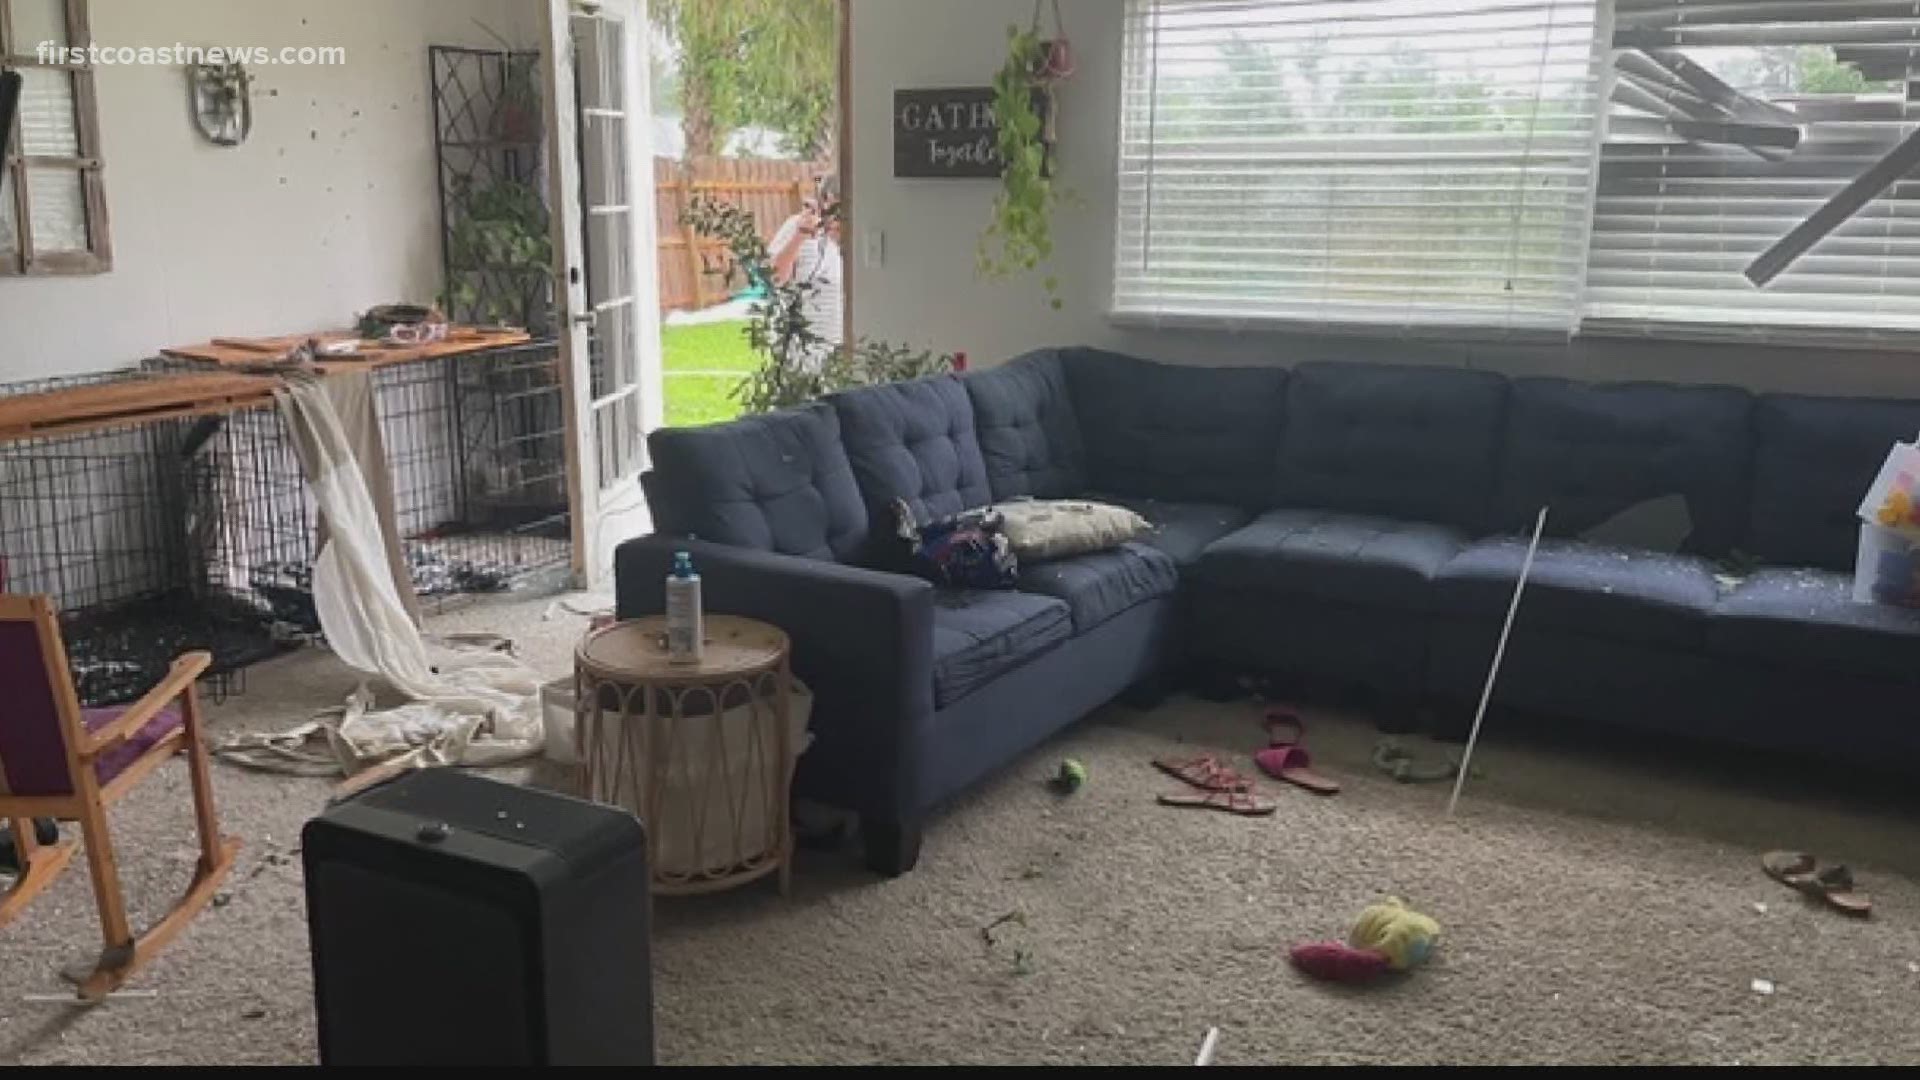 'Thank God we listened': Jacksonville woman credits emergency alerts with saving her life from tornado